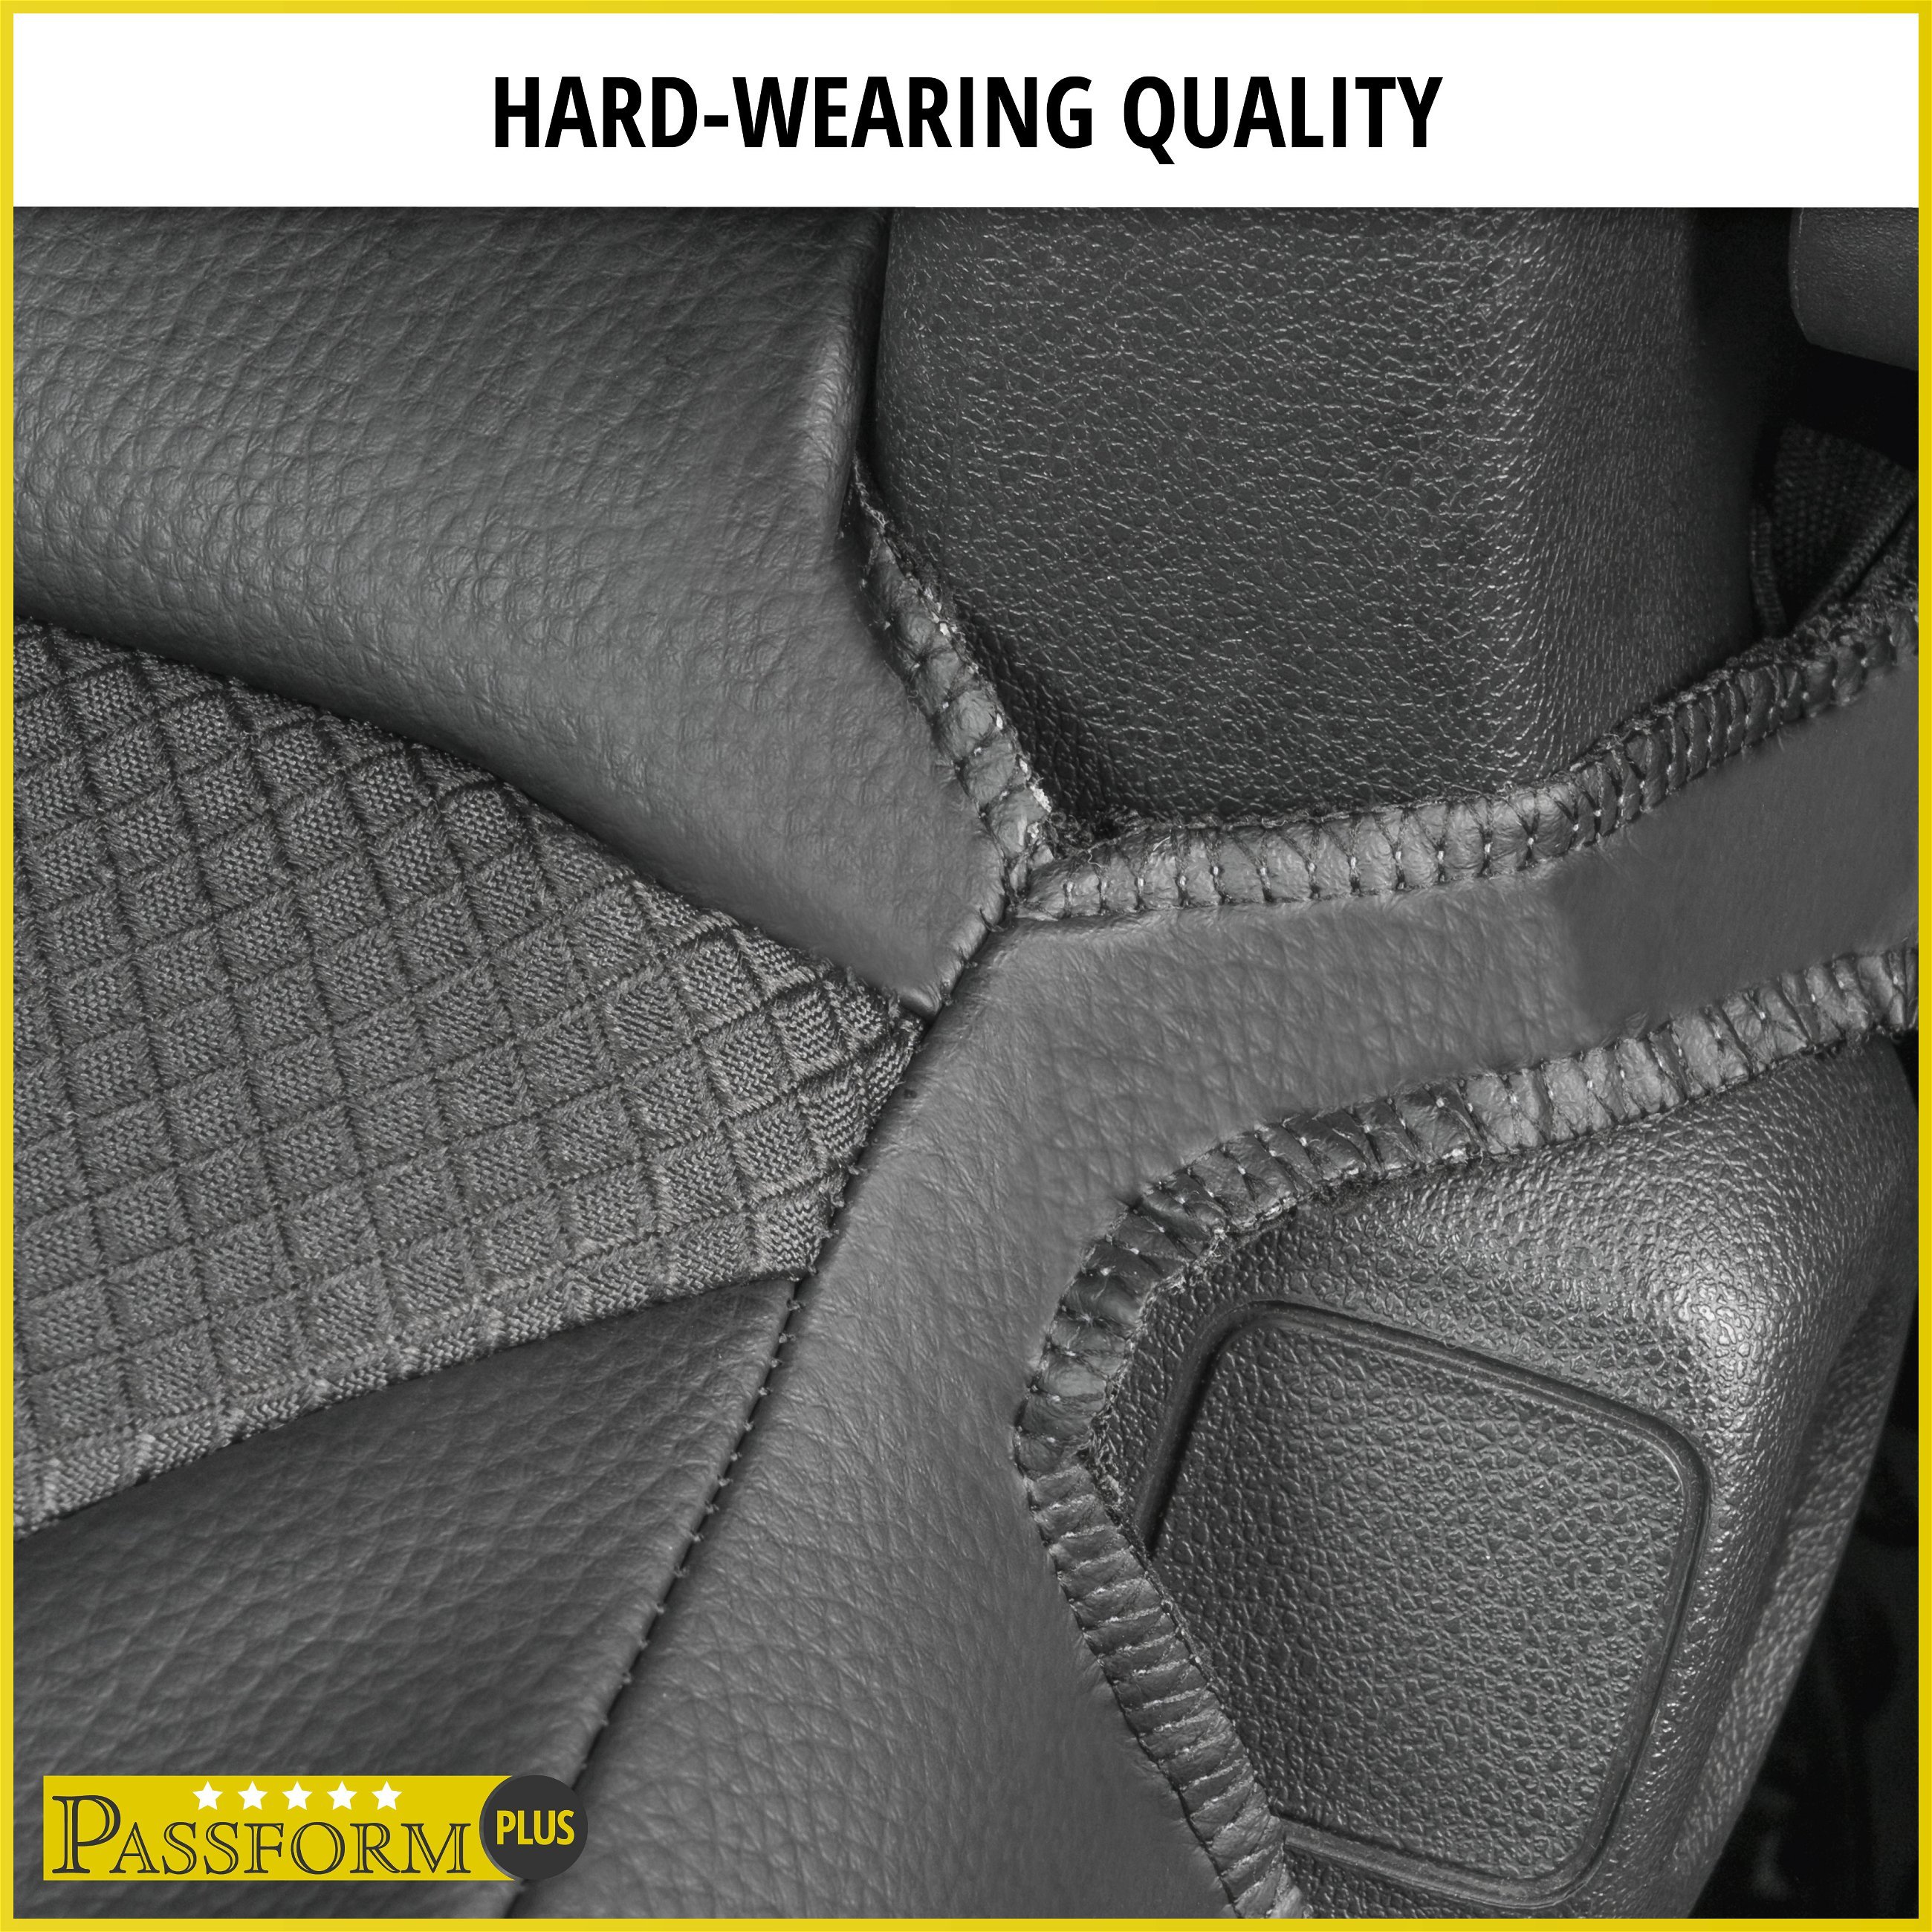 Premium Seat Cover for VW Crafter 2016-Today, 2 single seat covers front + 2 armrest covers